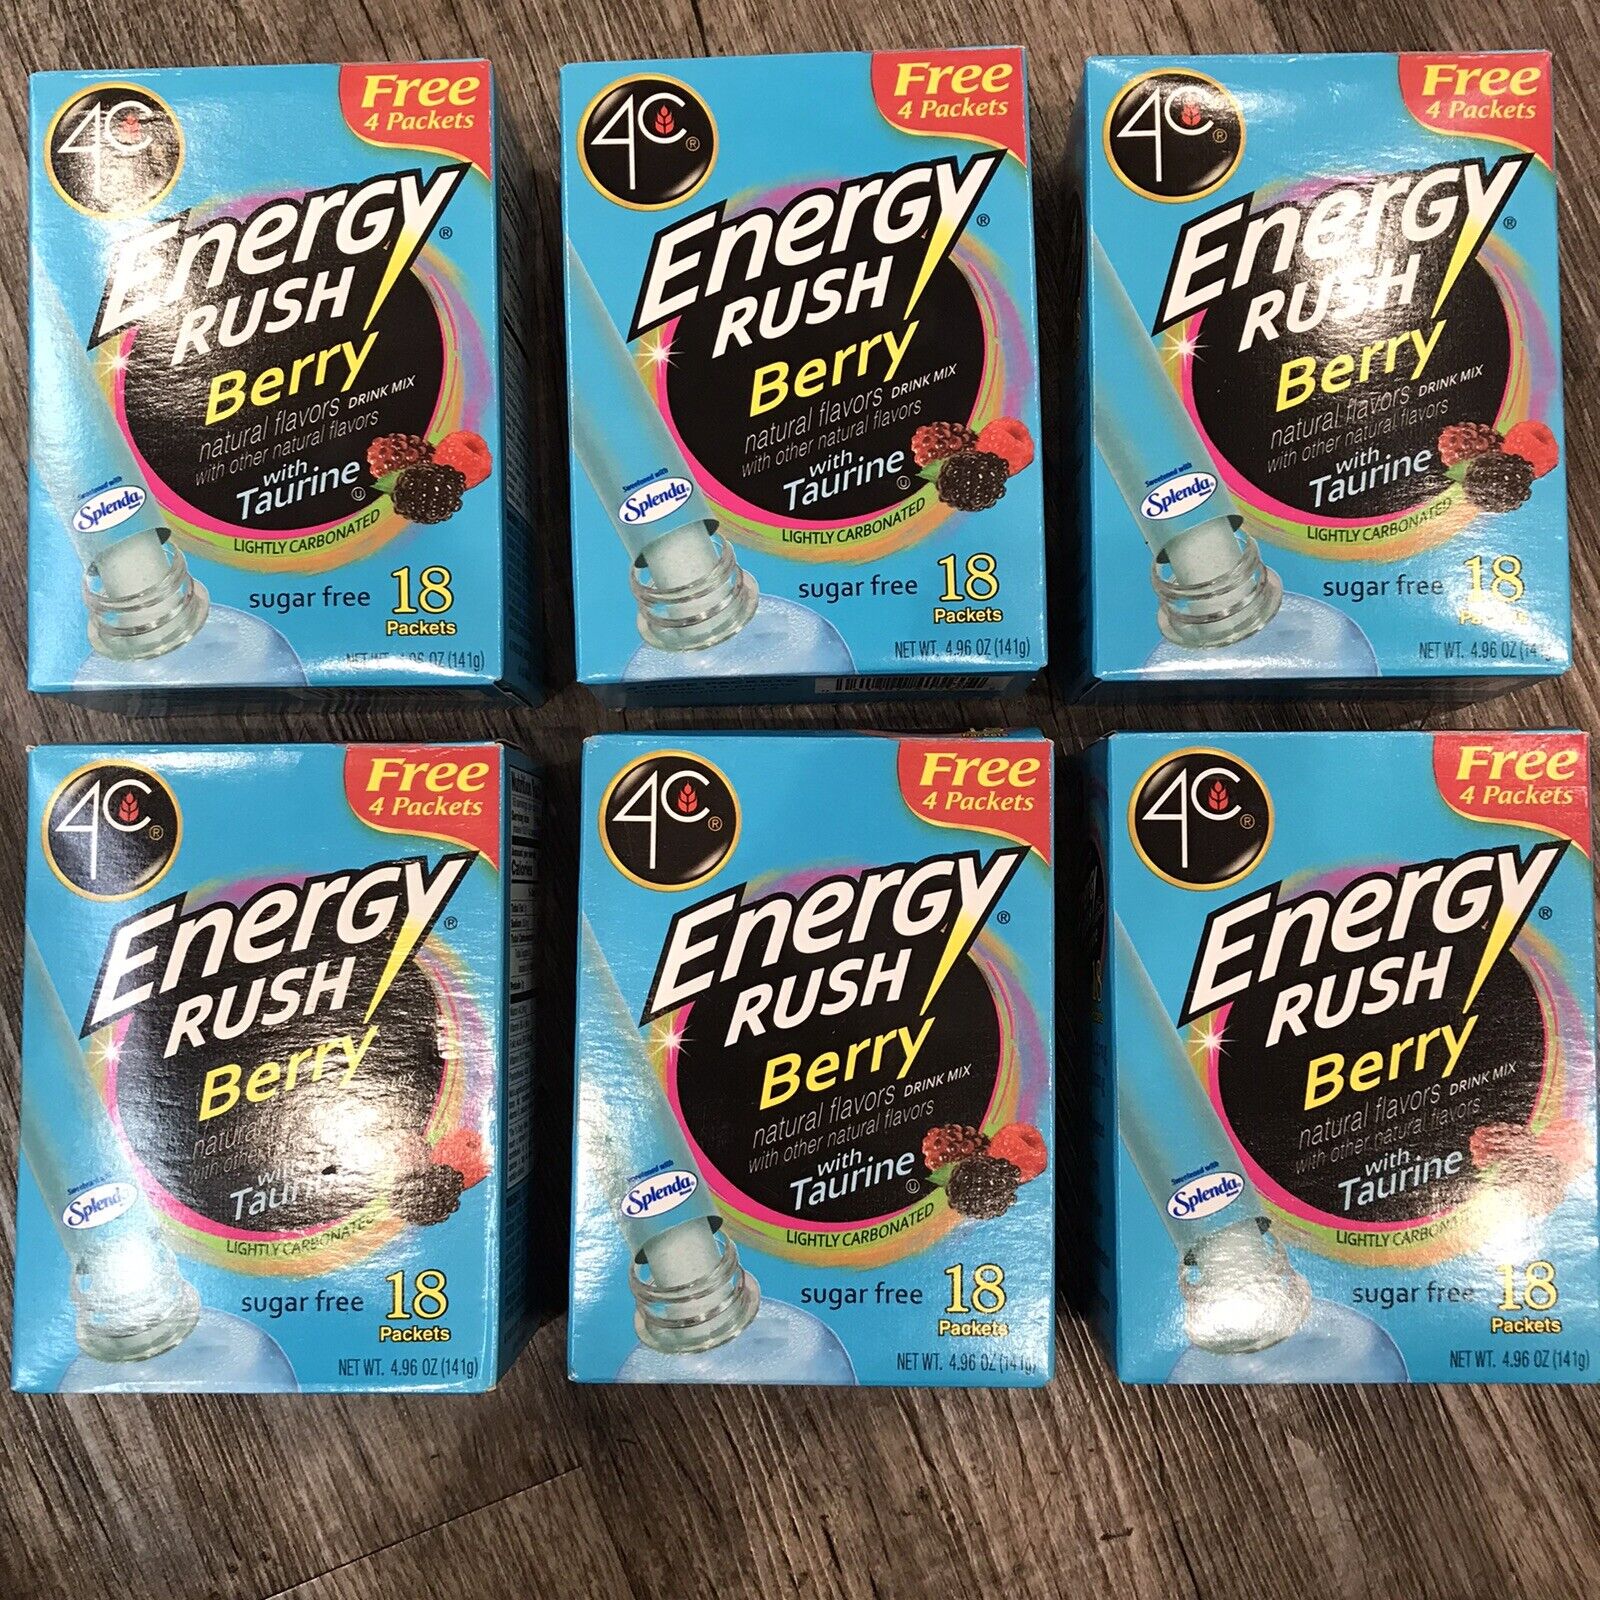 4c Energy Rush Berry With Taurine 108 Packets Bbd 3/23 “lot Of 6”new Open Box